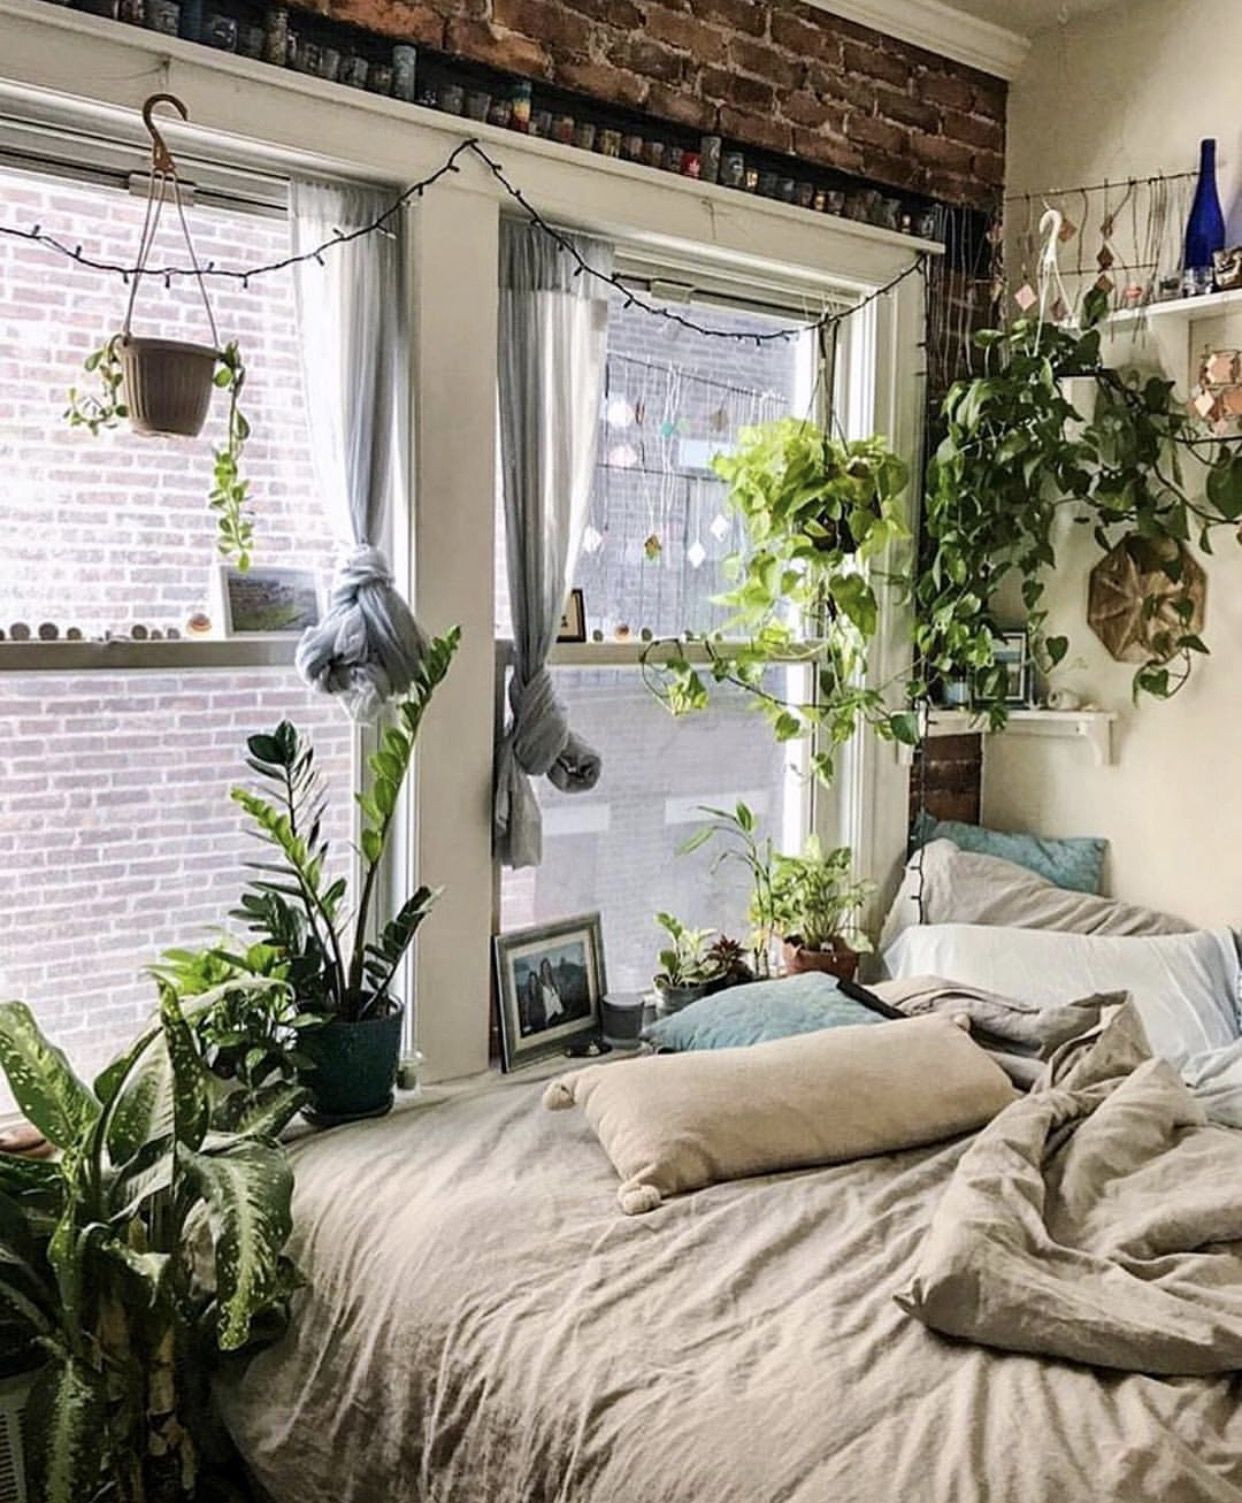 Small Bedroom Plants
 This small light filled bedroom is perfect for plants